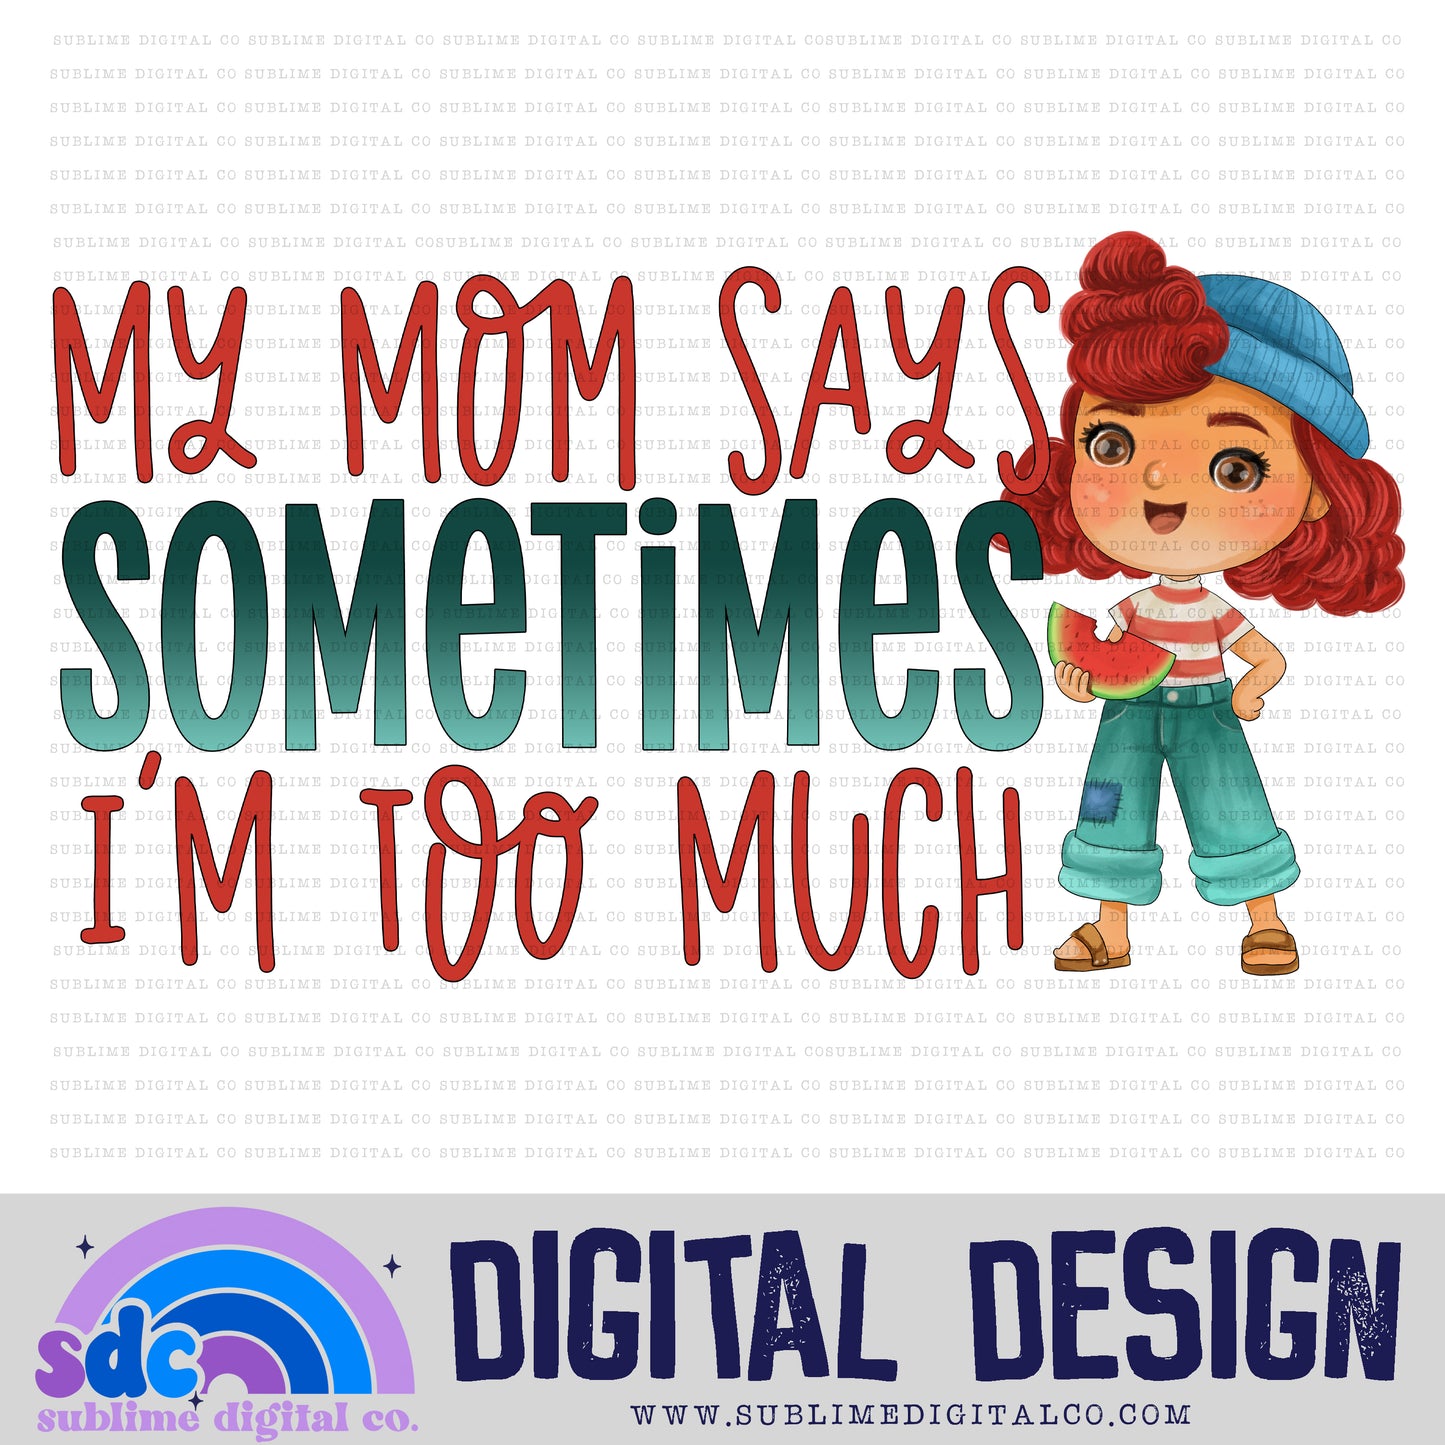 Sometimes I'm Too Much • Sea Monsters • Instant Download • Sublimation Design